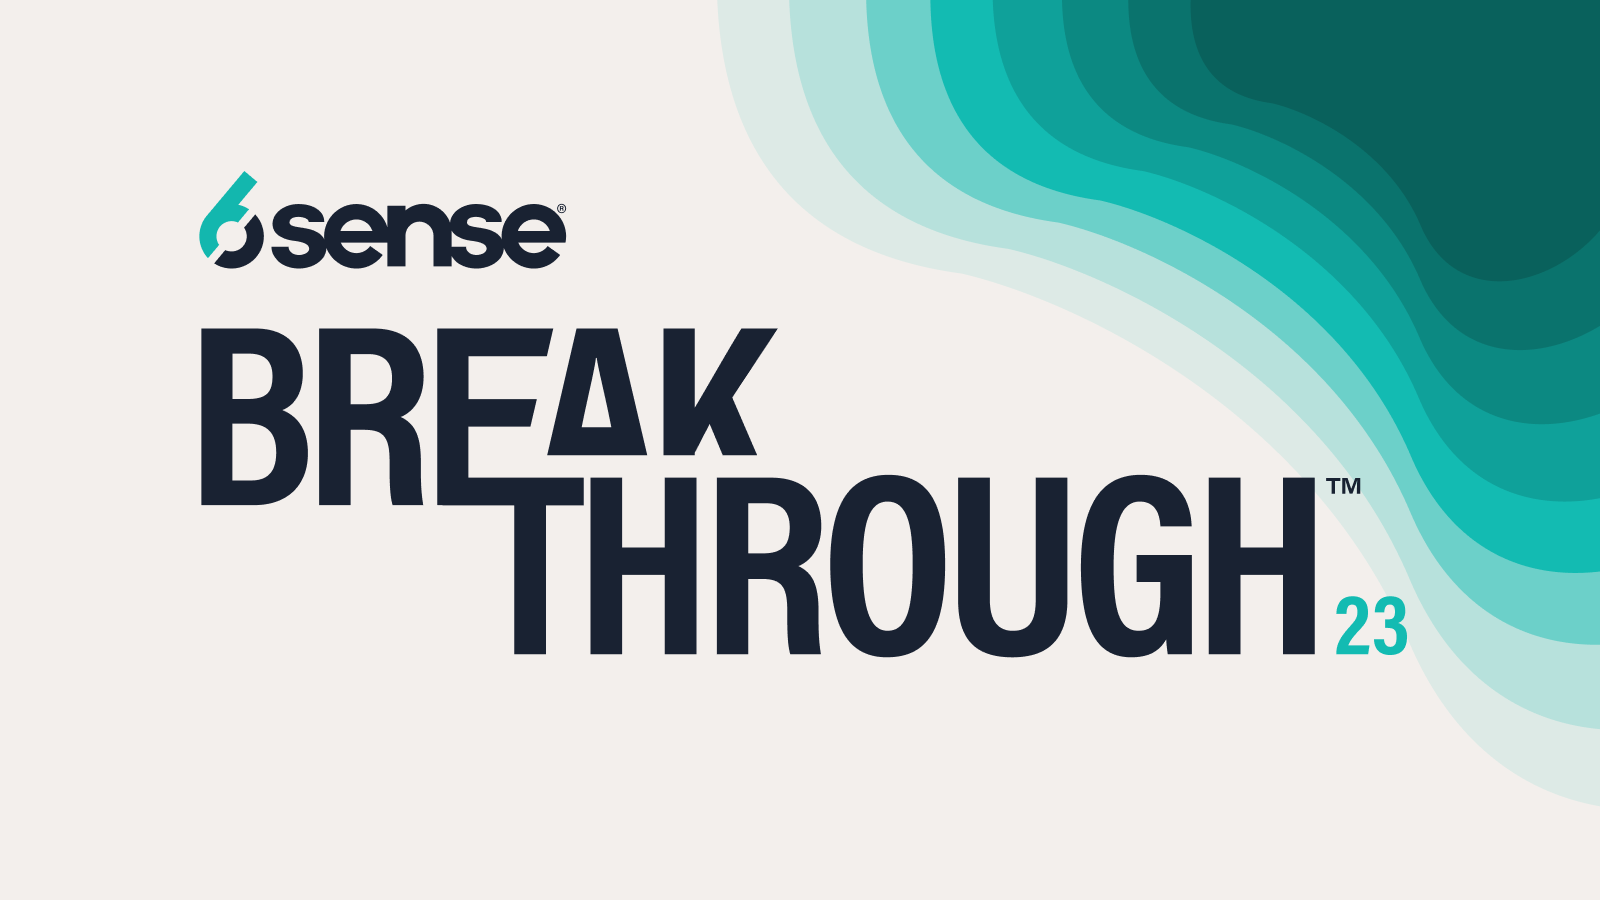 6Sense Breakthrough event with design by Superside